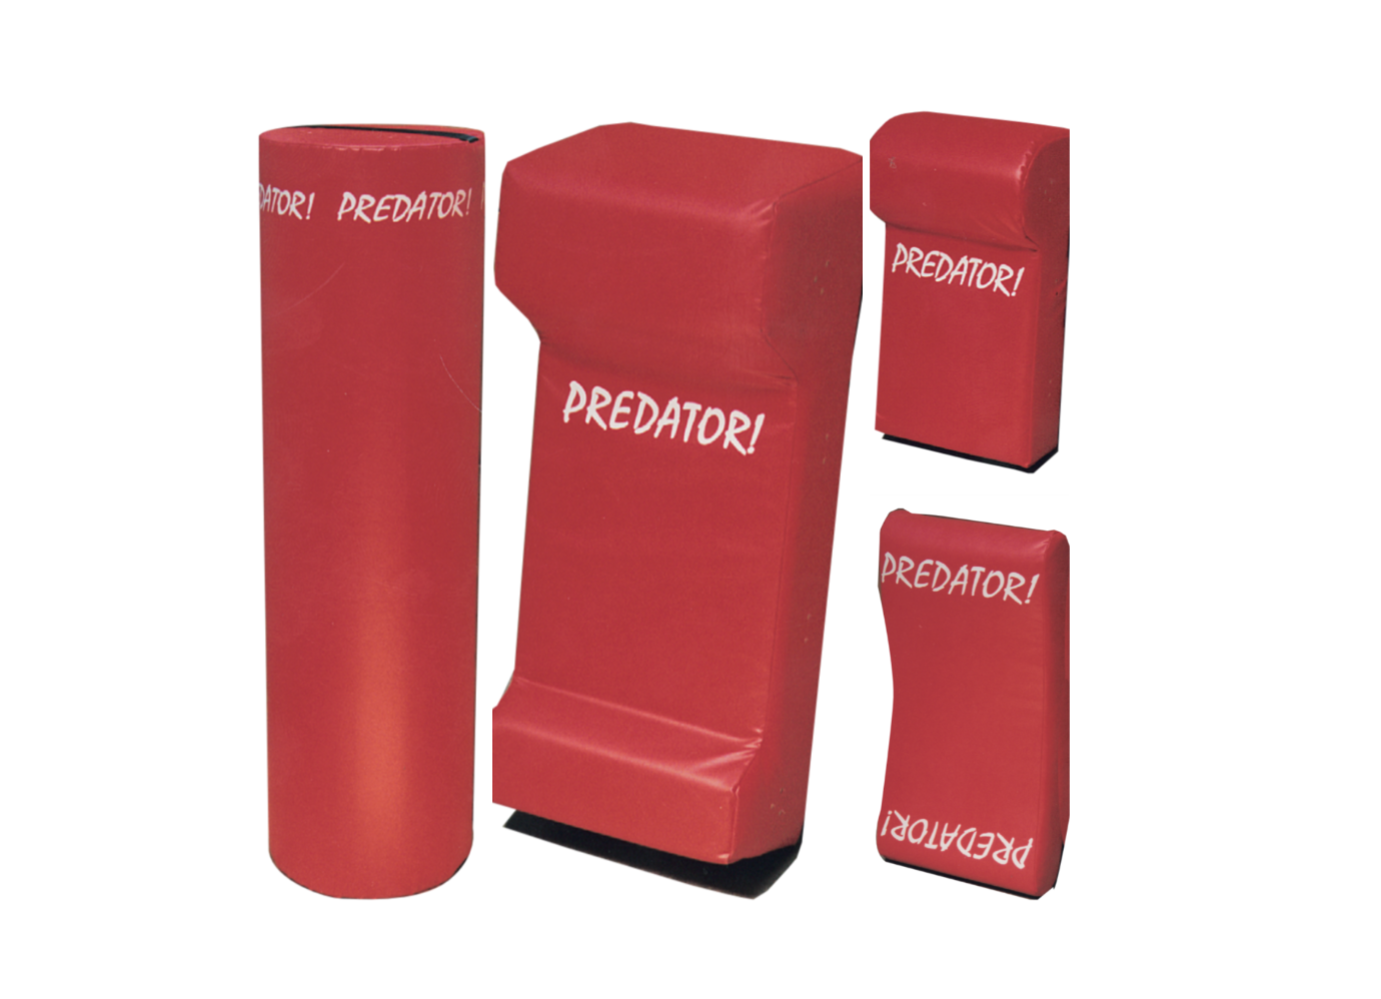 Rugby Training Pads by Predator!